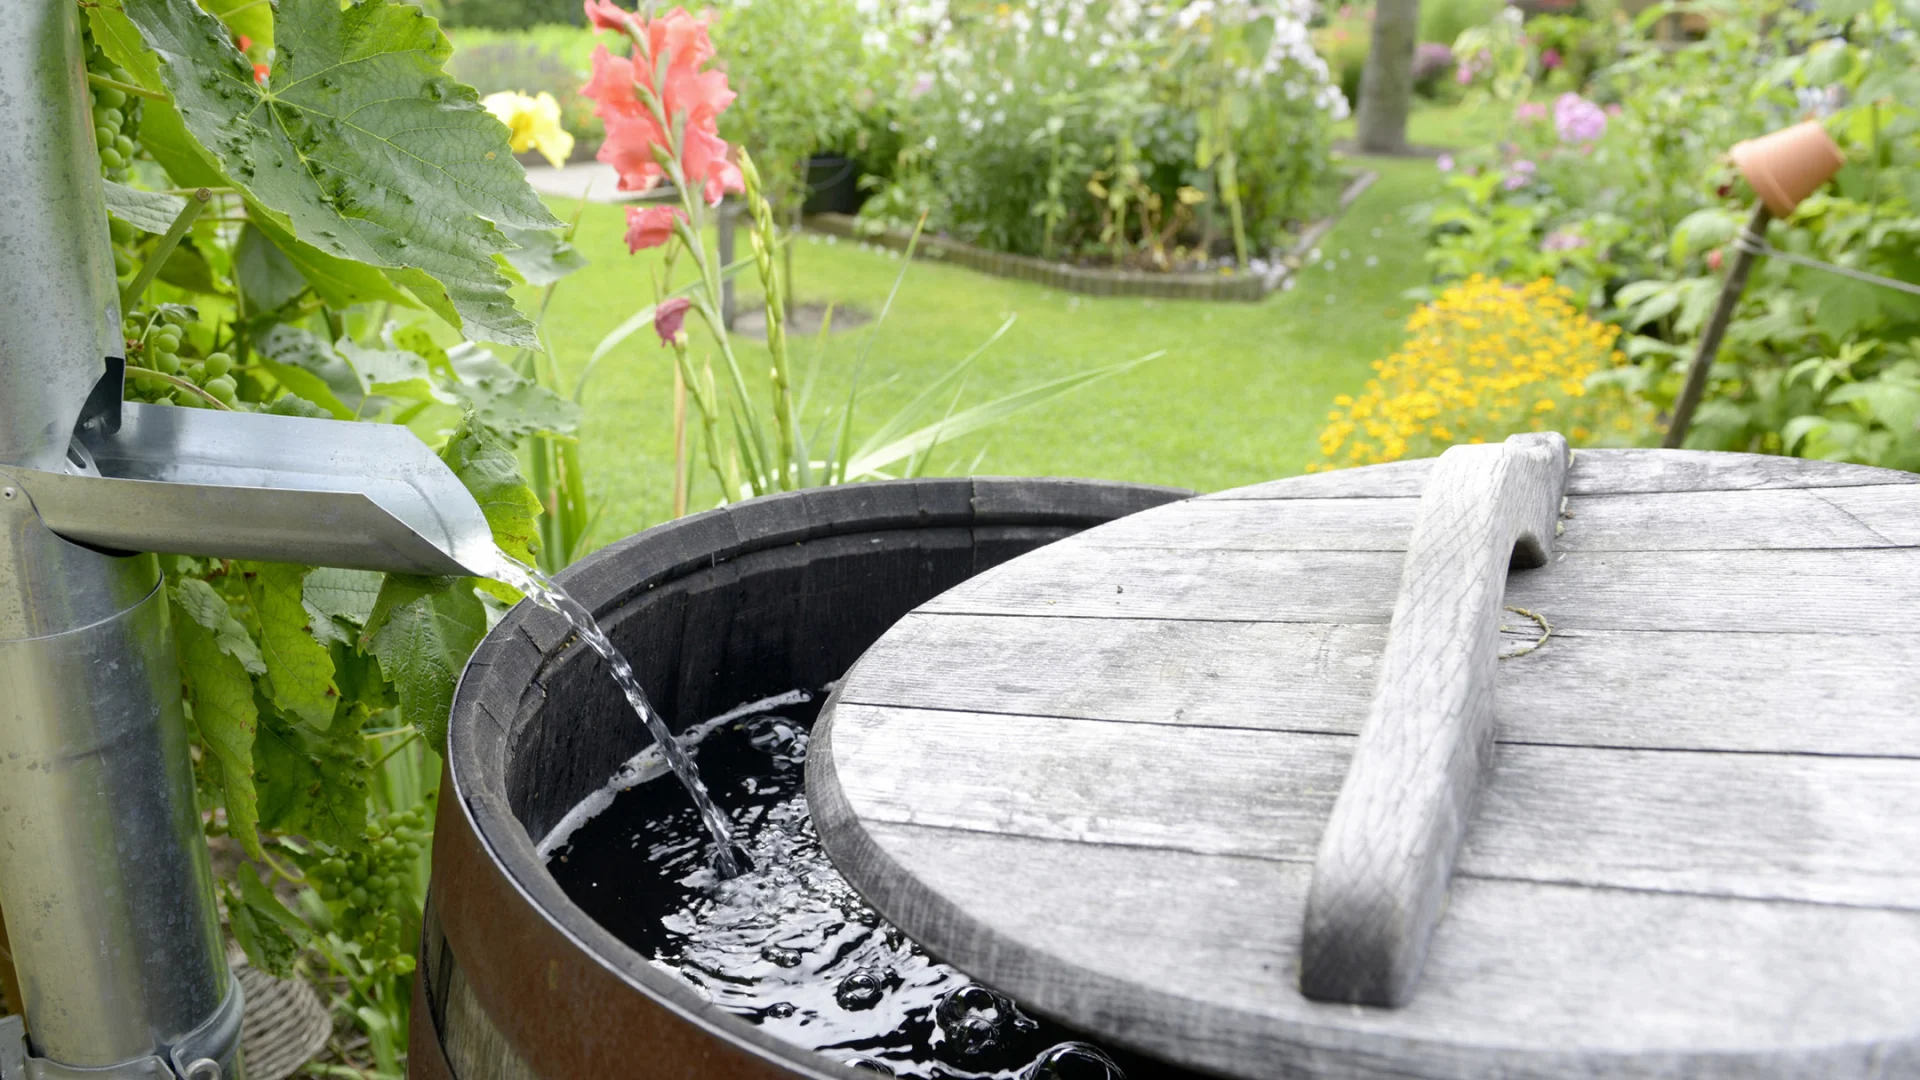 Rainwater is collected in a rainwater basin.